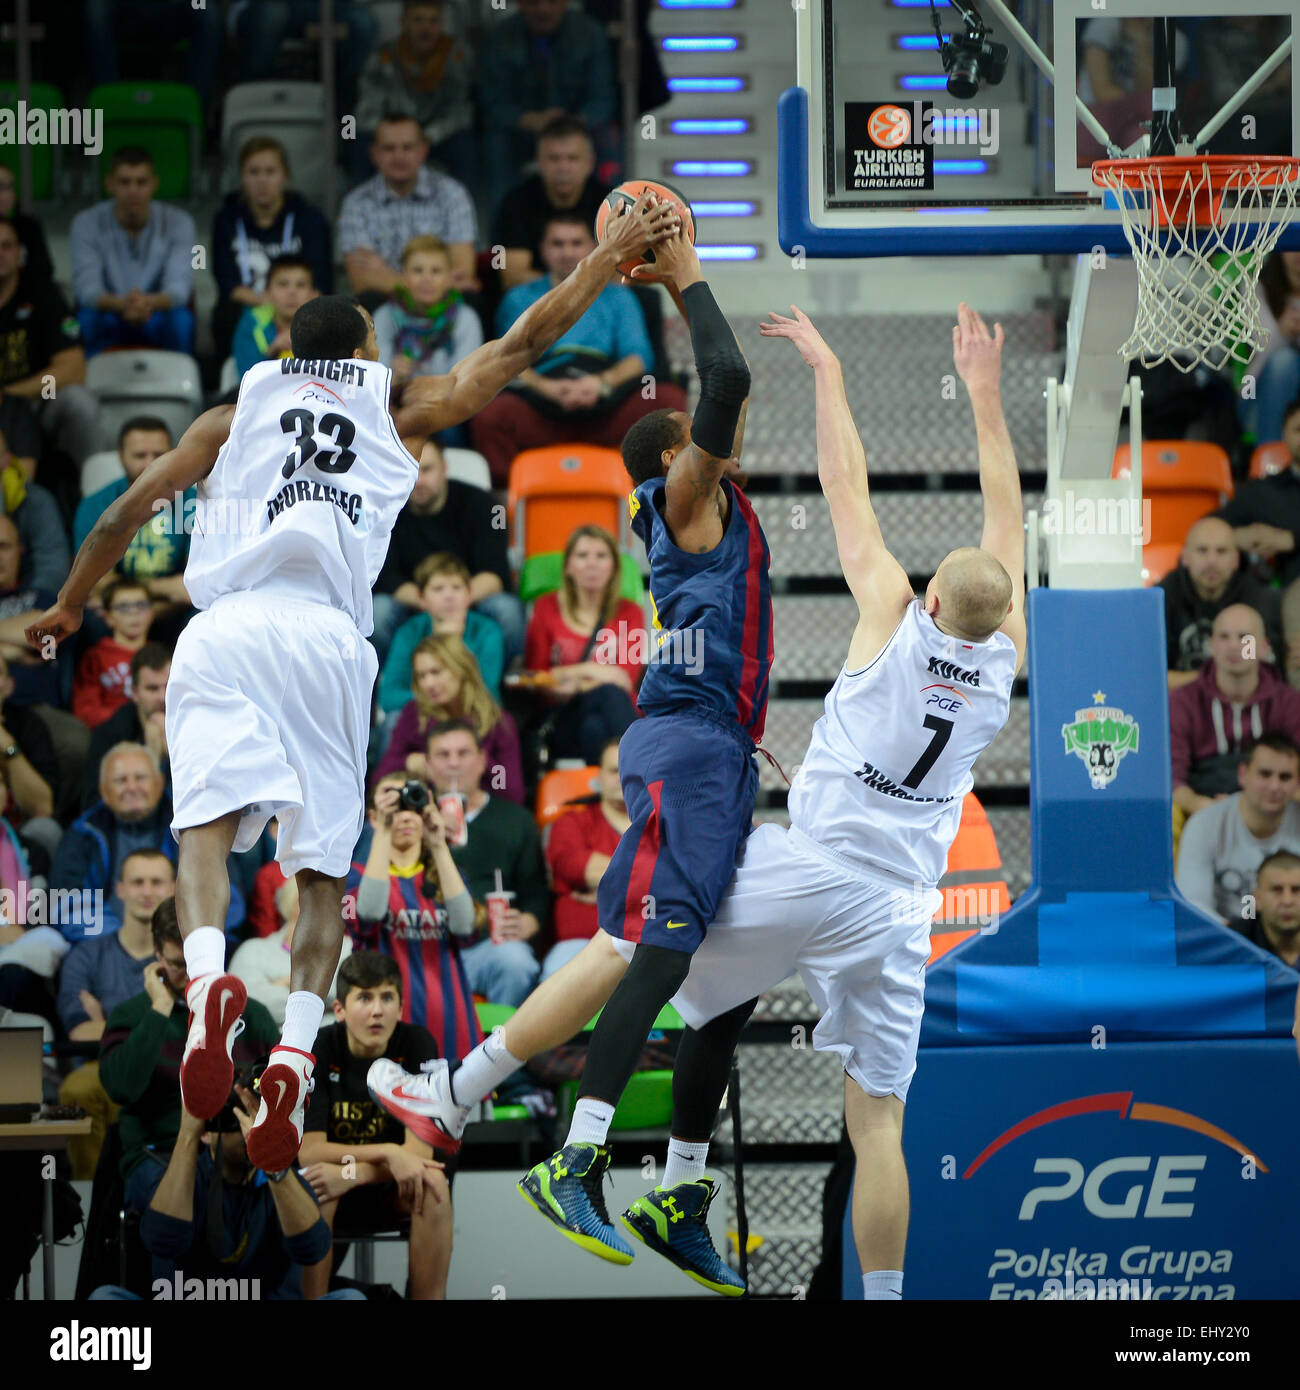 Chris Wright (L), Deshaun Thomas and Damian Kulig (R) in action during the Euroleague basketball match Stock Photo